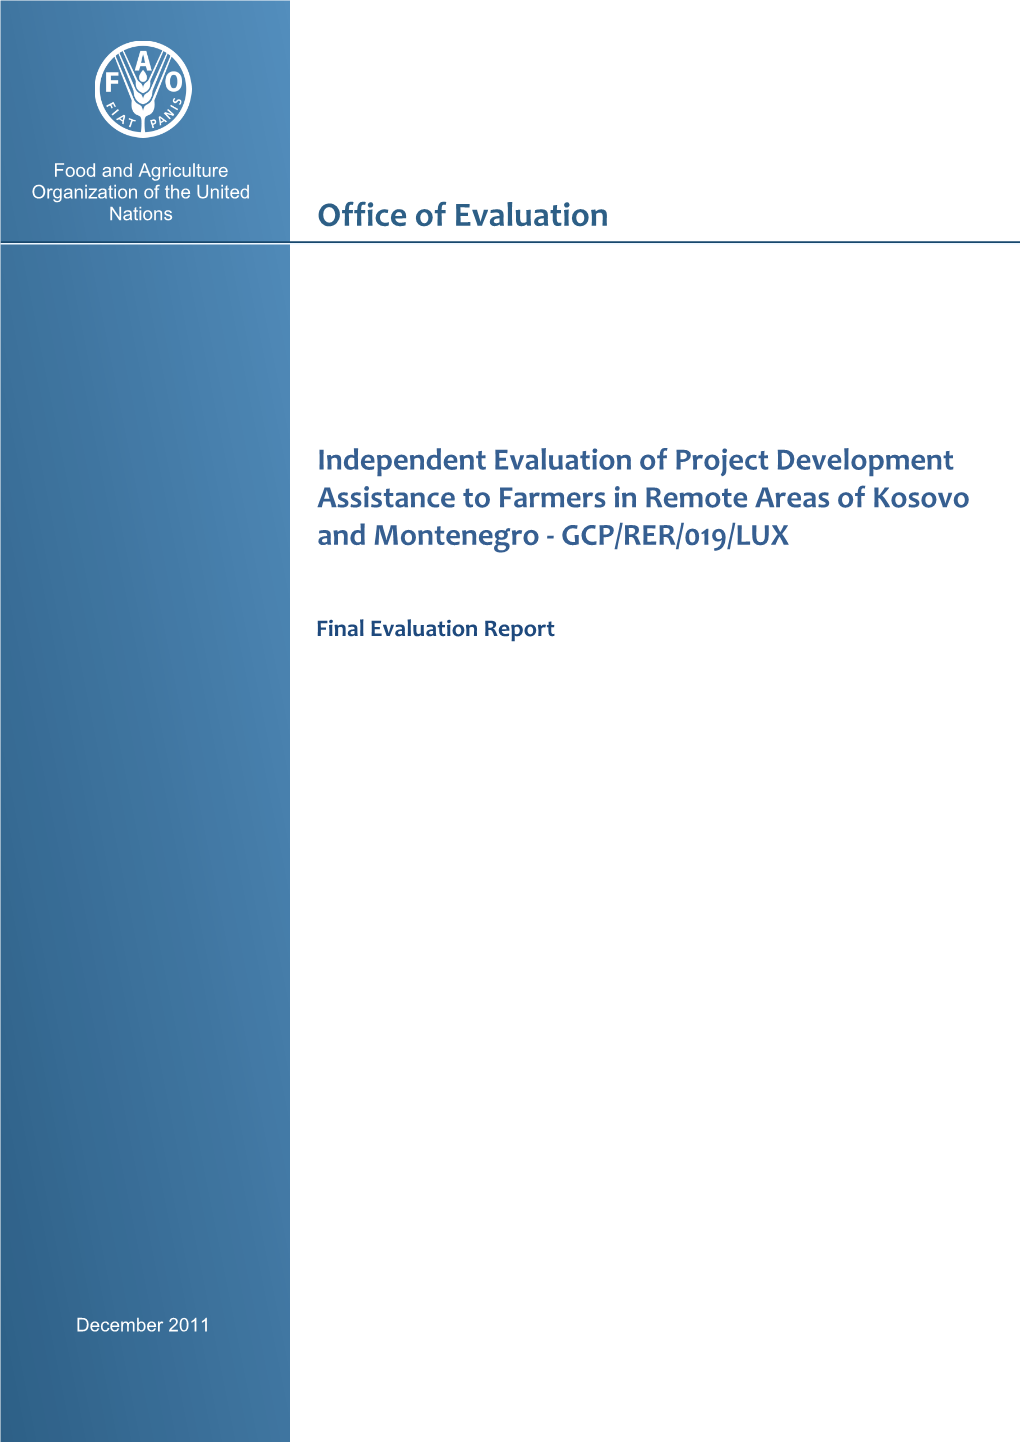 Independent Evaluation of Project Development Assistance To